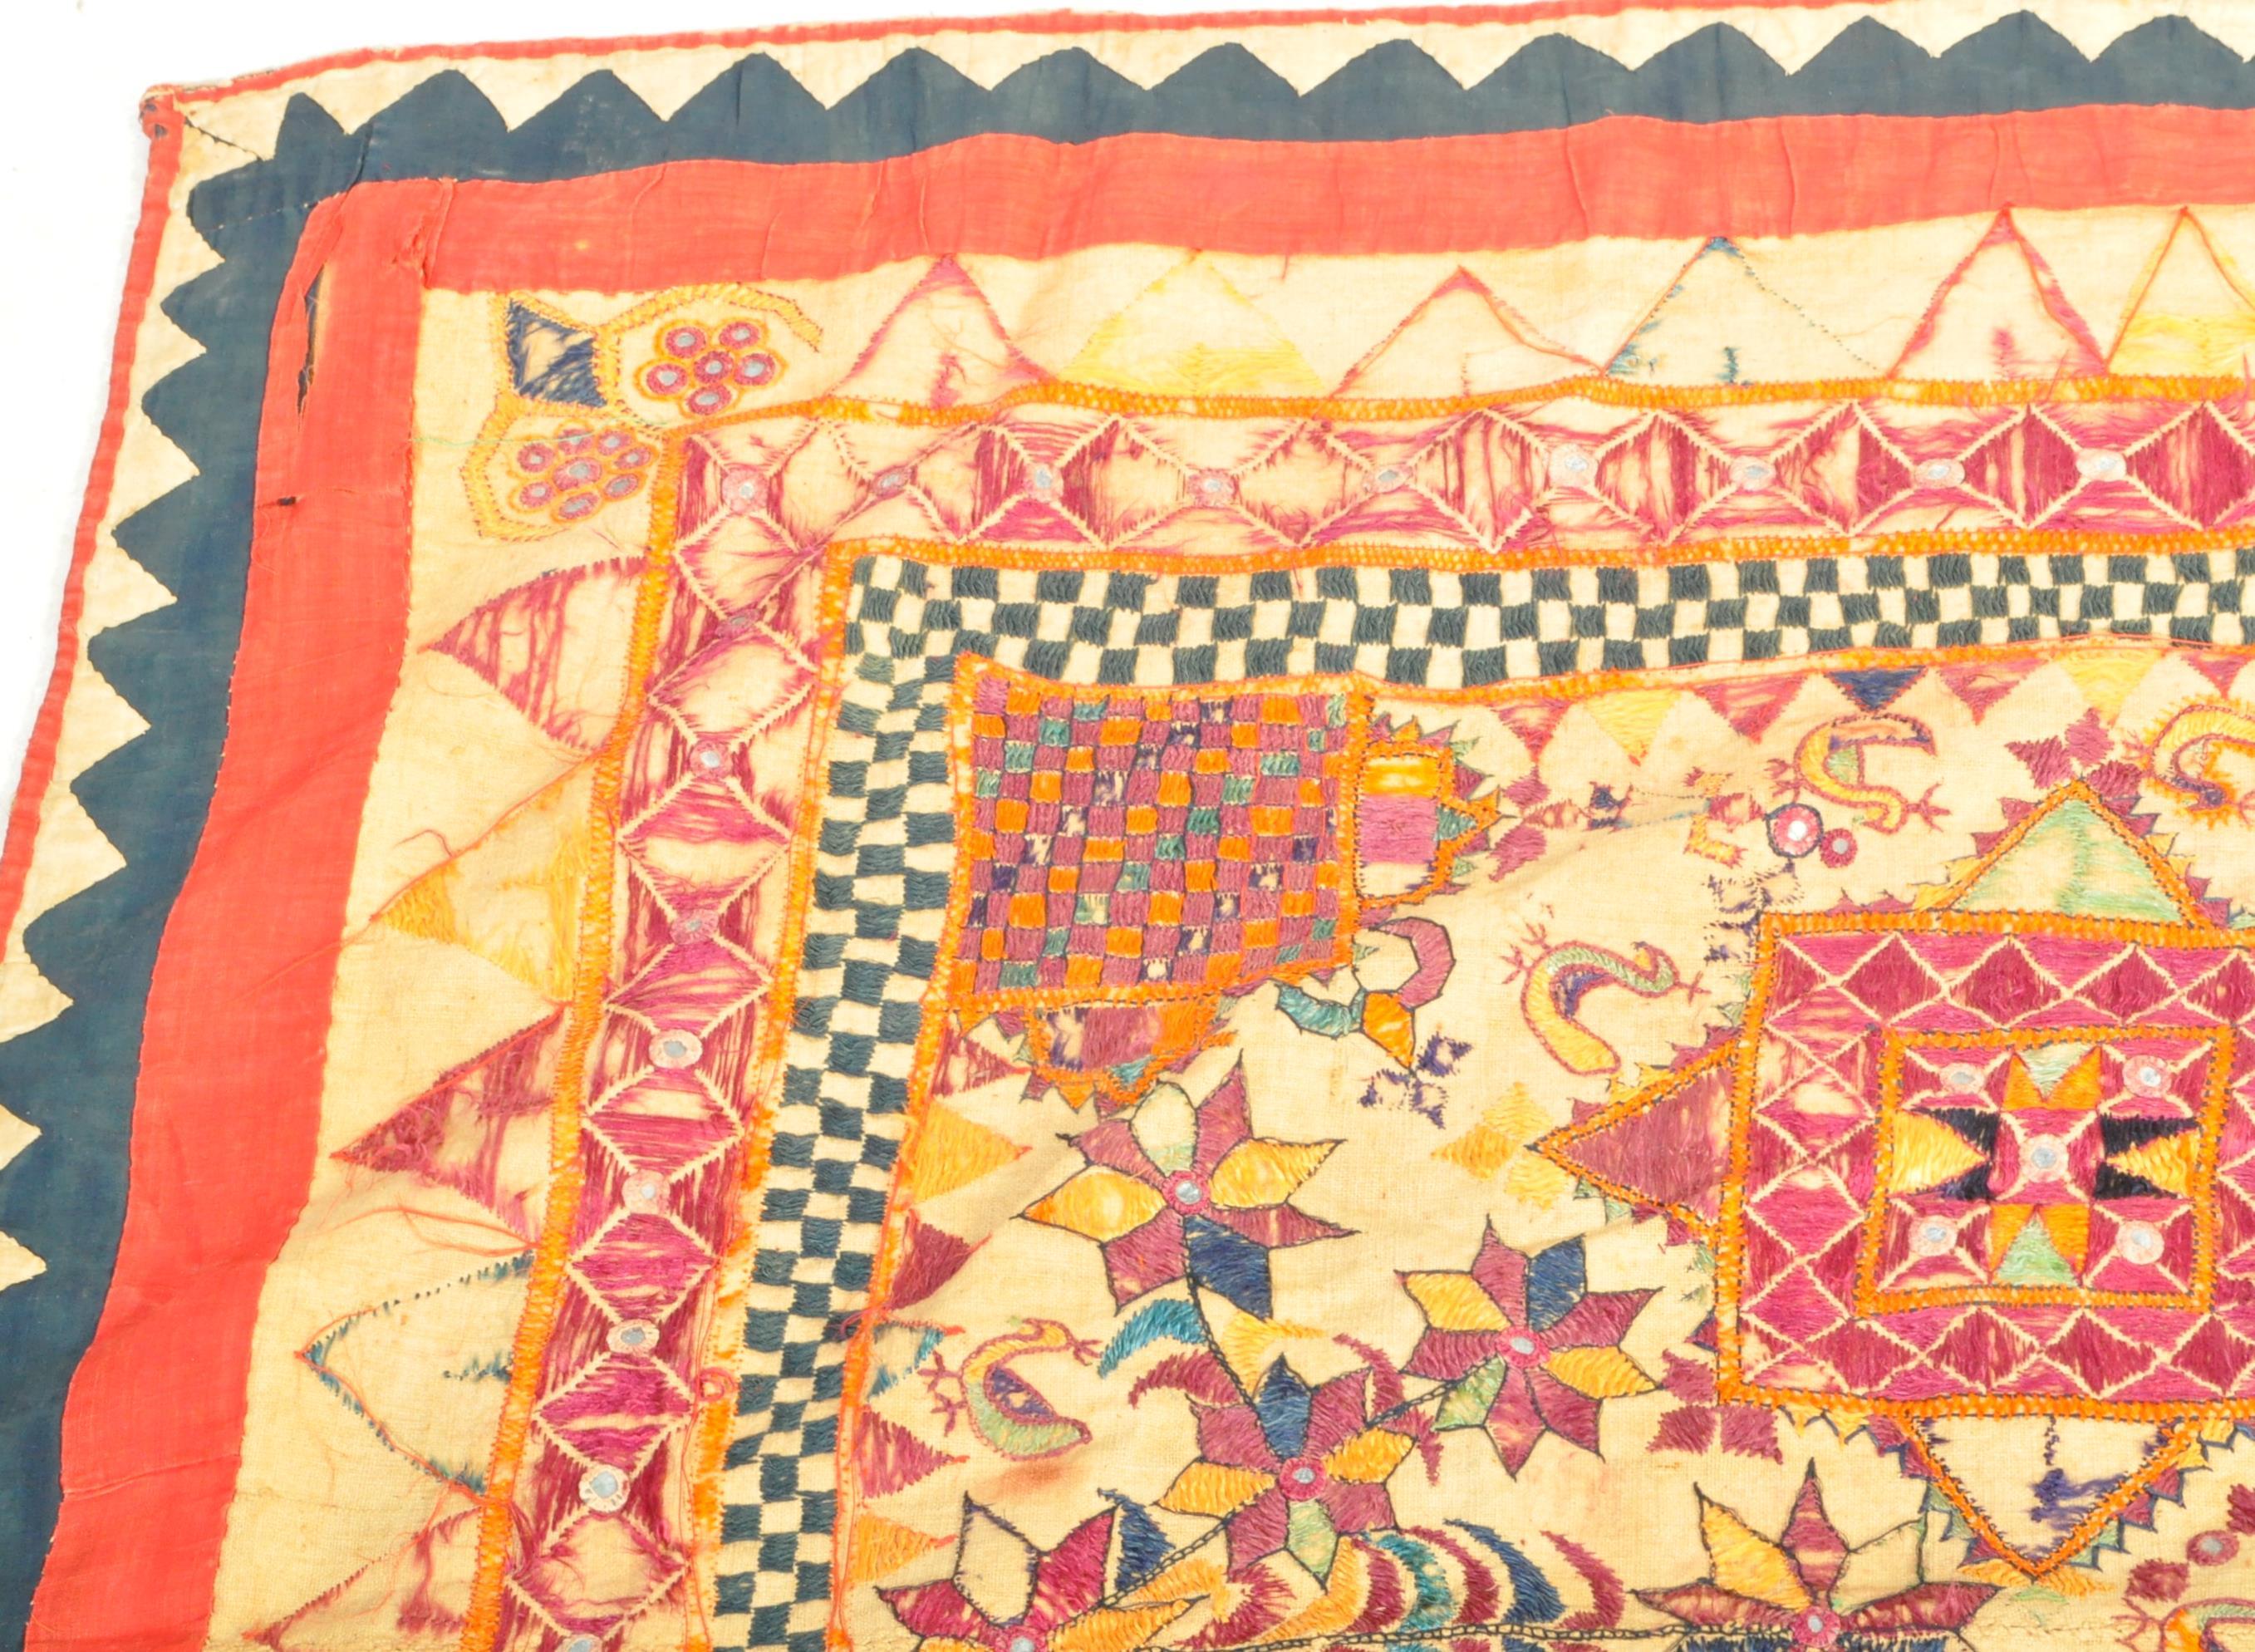 EARLY 20TH CENTURY INDIAN EMBROIDERED SHISHA TEXTILE - Image 3 of 7